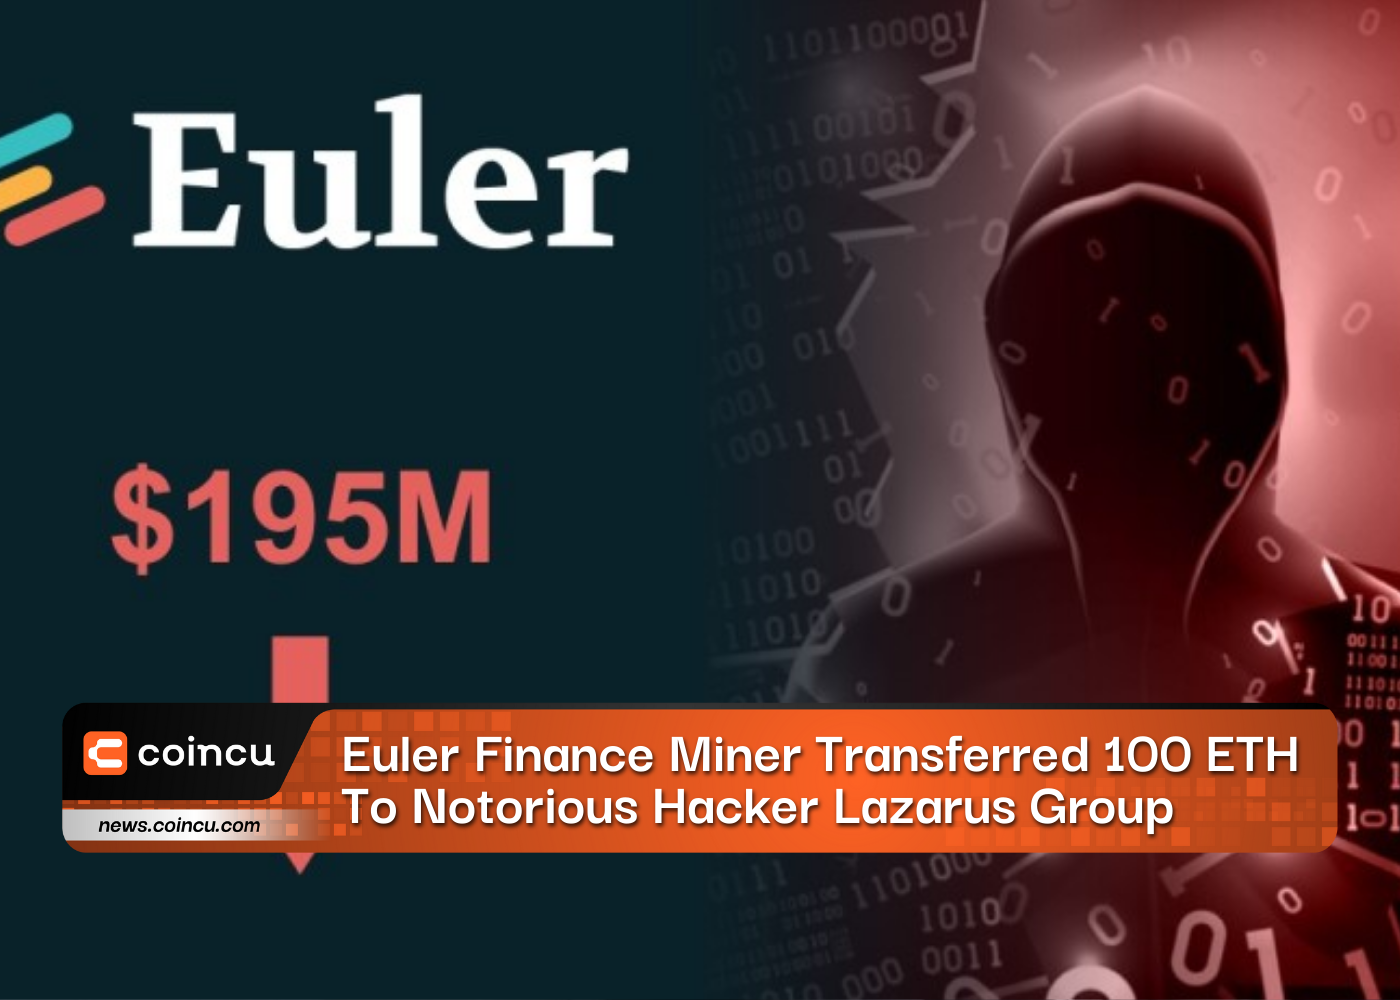 Euler Finance Miner Transferred 100 ETH To Notorious Hacker Lazarus Group